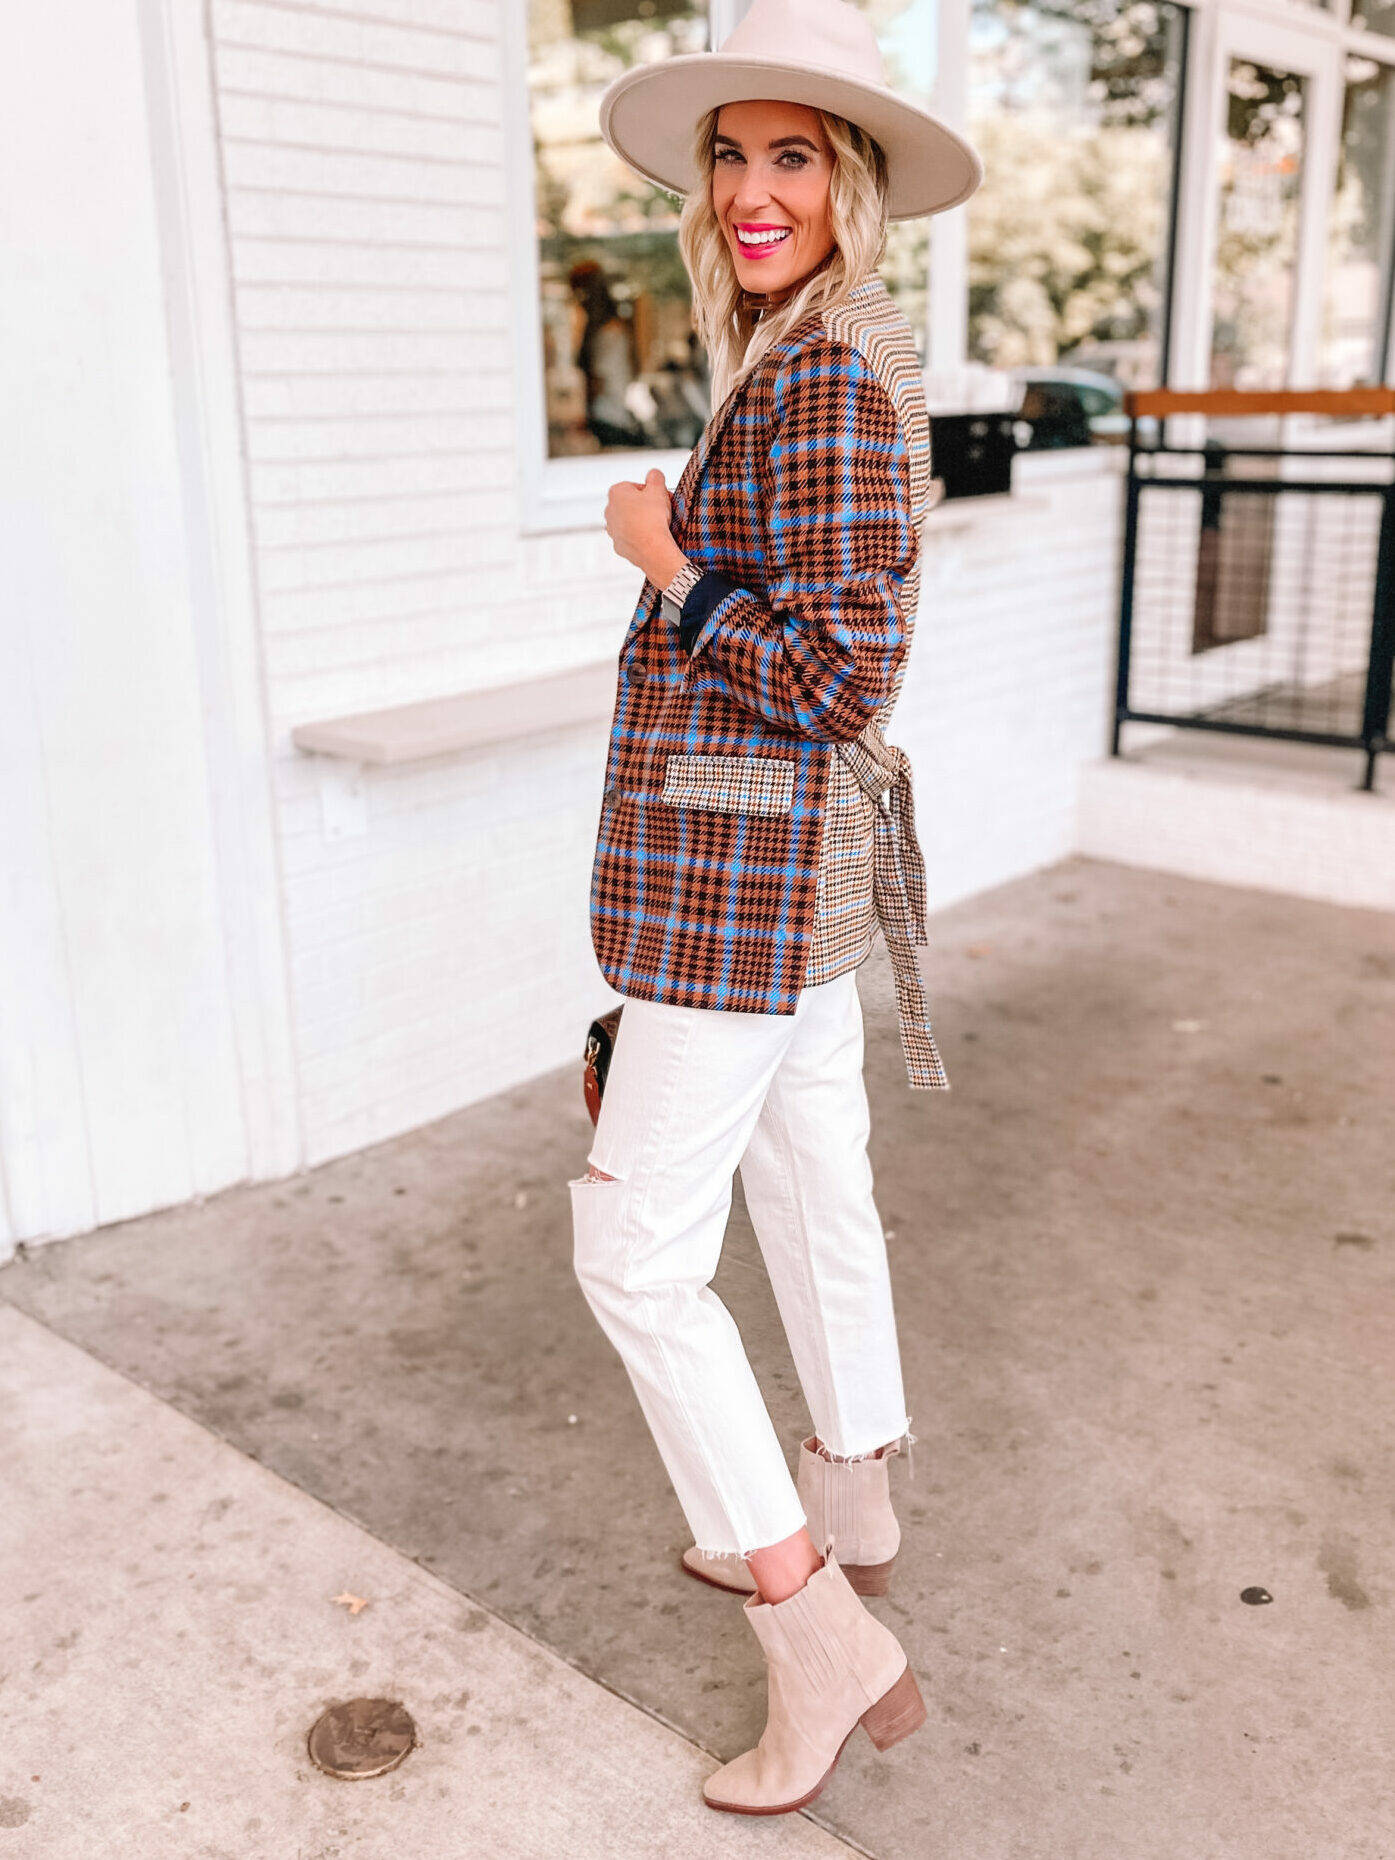 Sharing a mini Target haul today with some really fun mix and match fall pieces for work and weekend today! I LOVE this unique plaid blazer and cream jeans. 